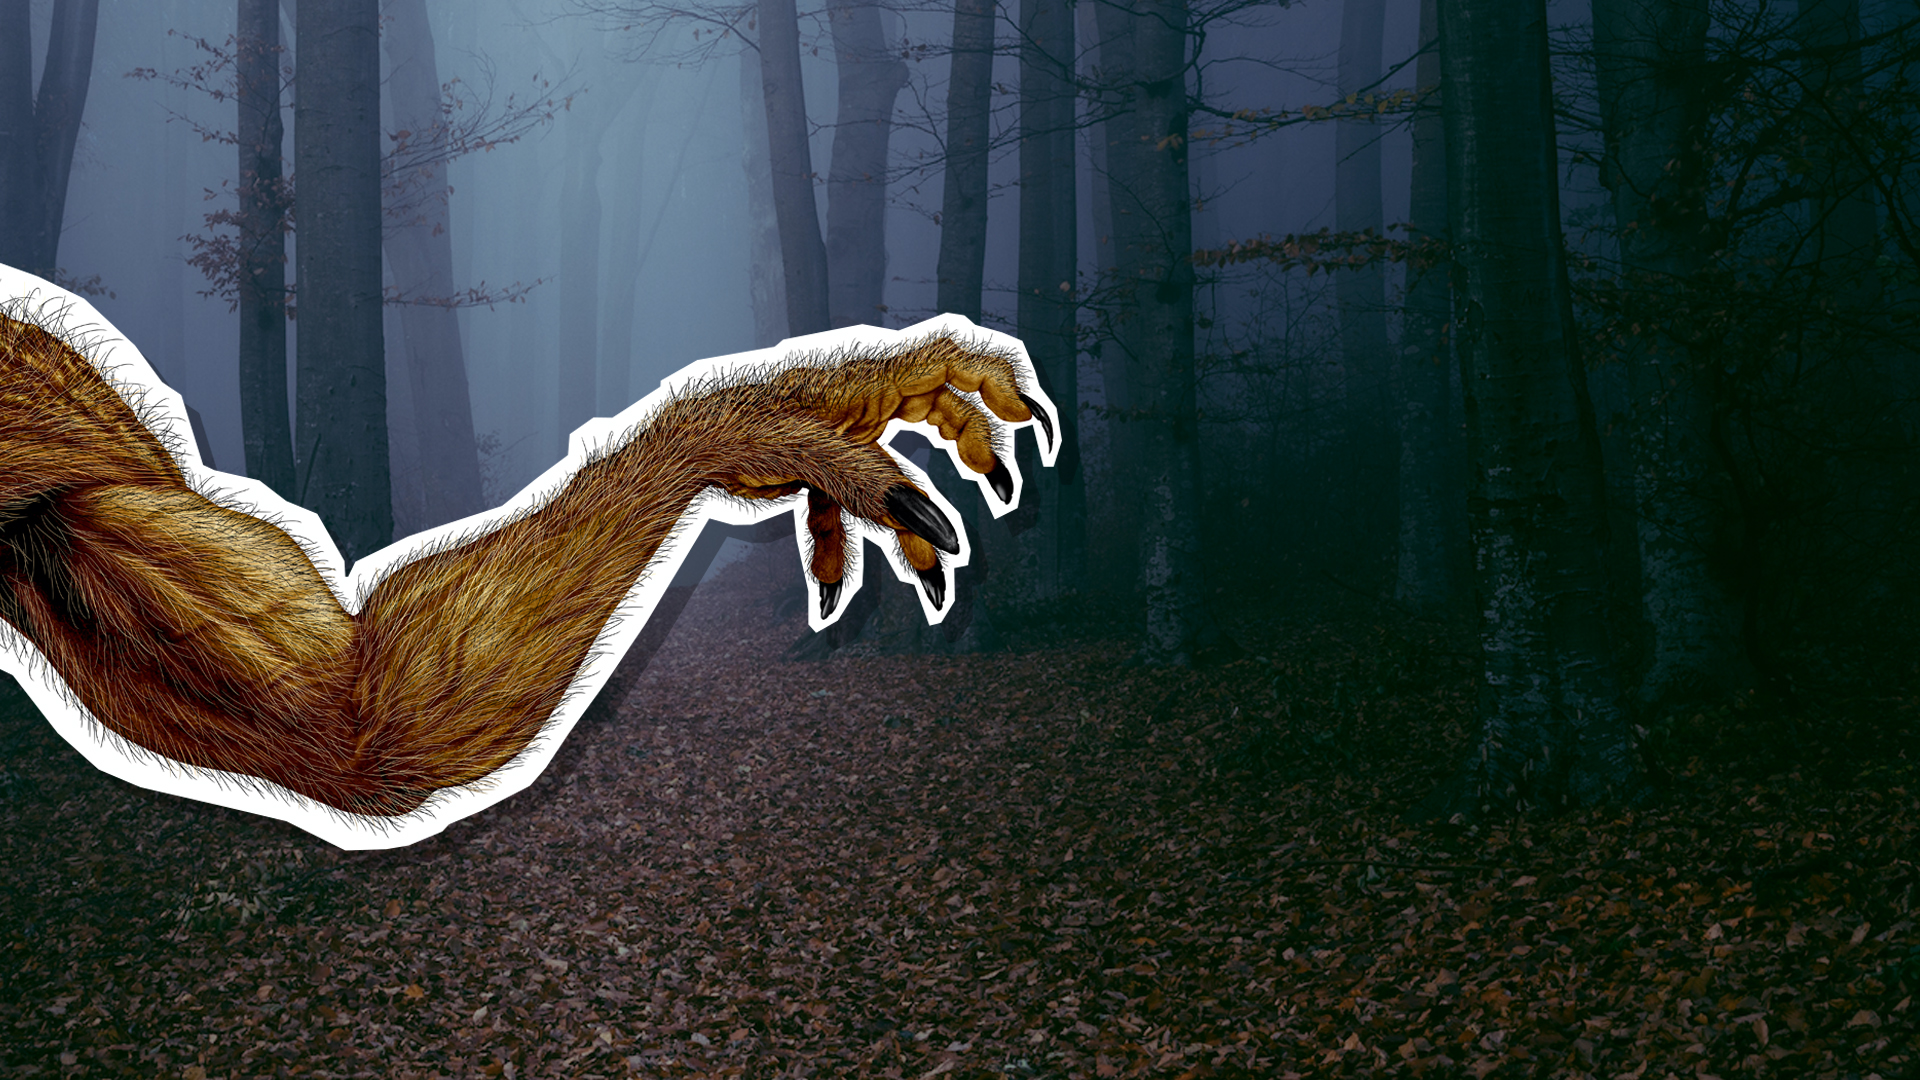 A werewolf arm in a spooky forest